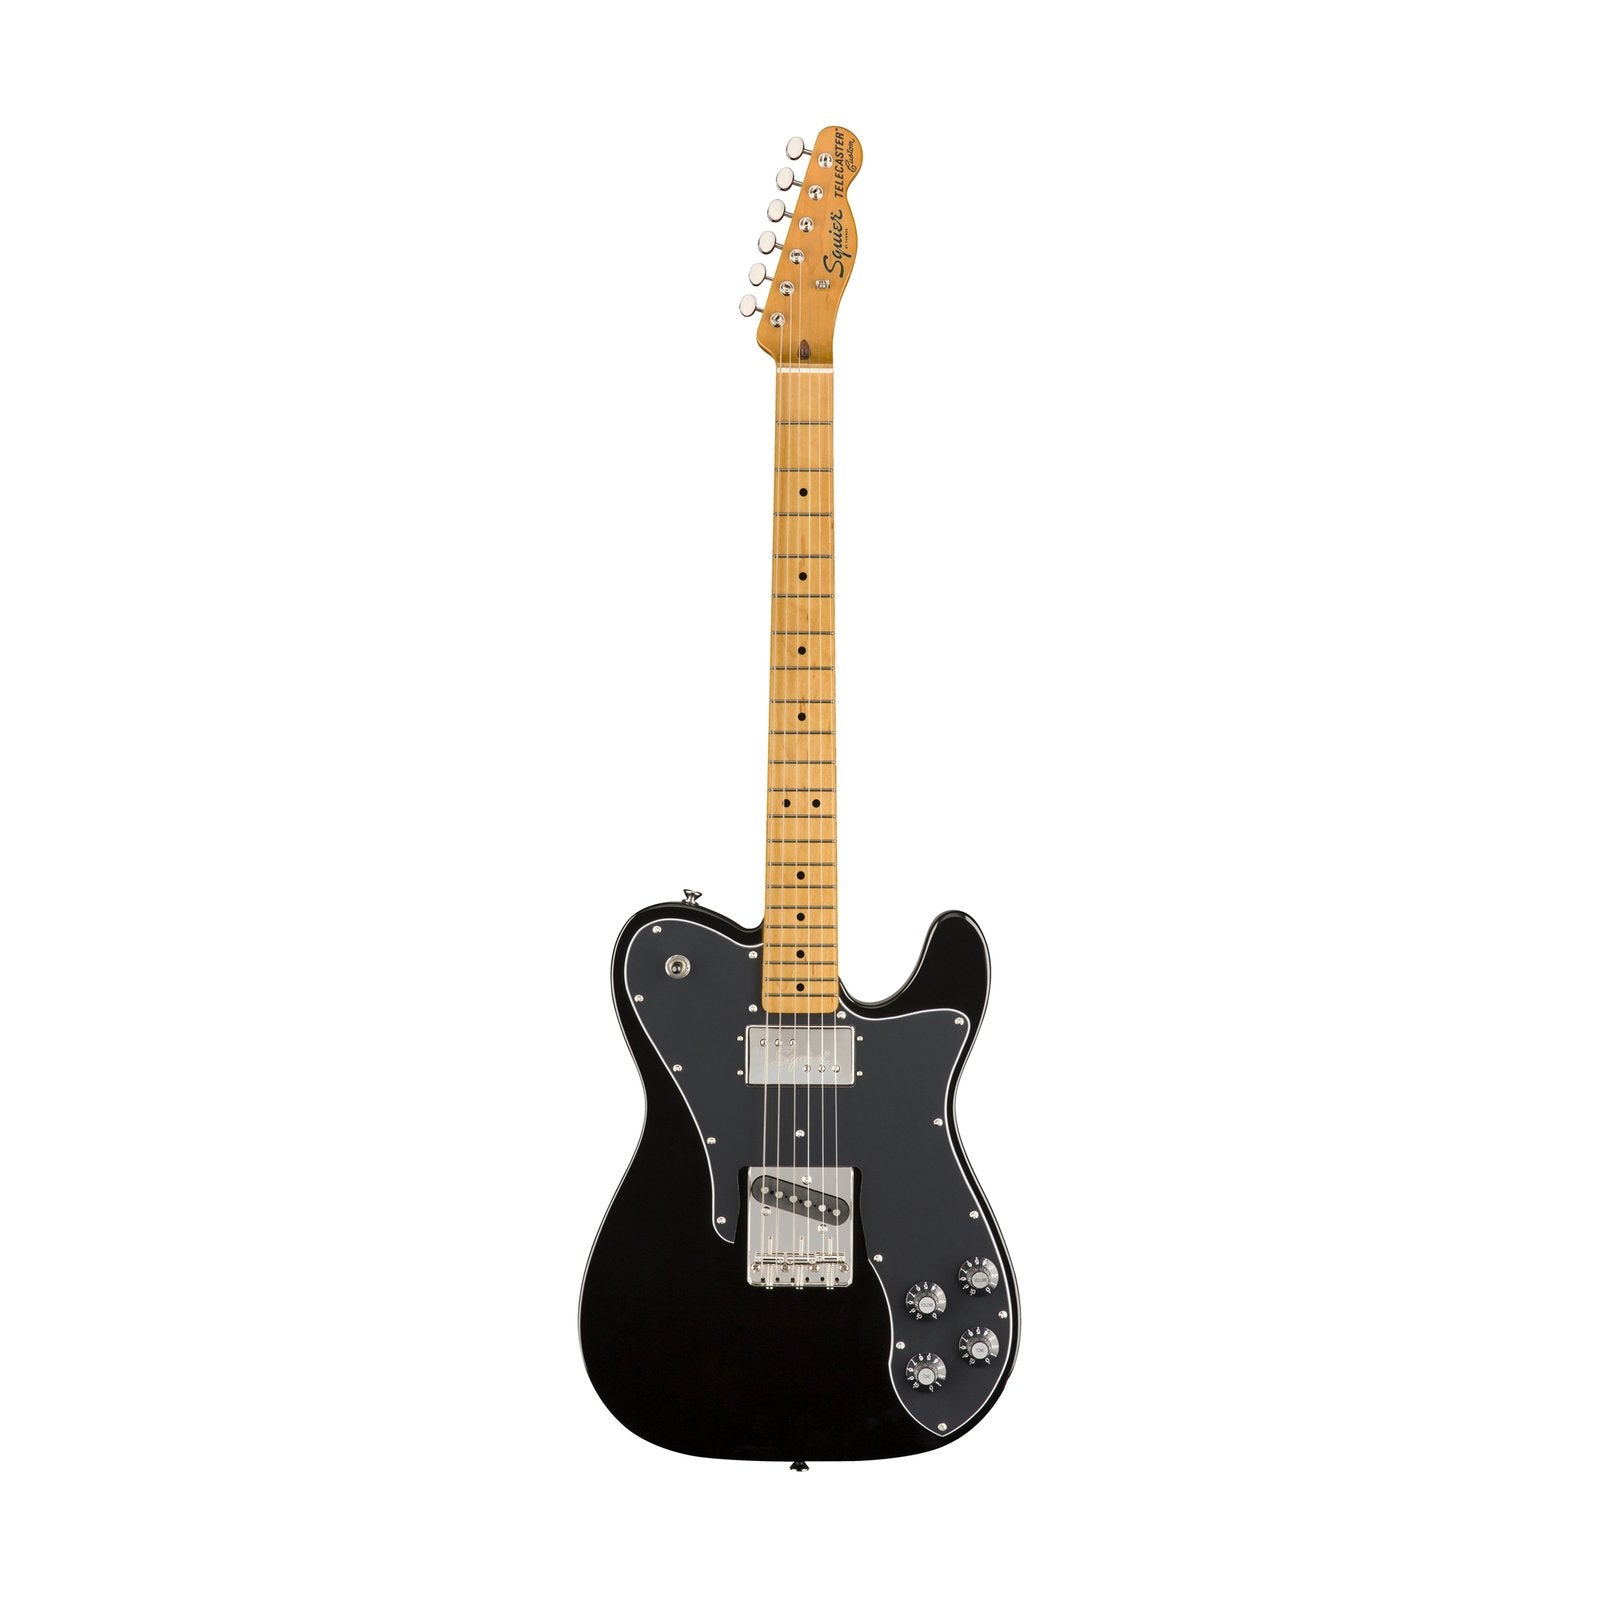 Squier Classic Vibe 70s Telecaster Custom Electric Guitar, Maple FB, Black, SQUIER BY FENDER, ELECTRIC GUITAR, squier-by-fender-electric-guitar-037-4050-506, ZOSO MUSIC SDN BHD